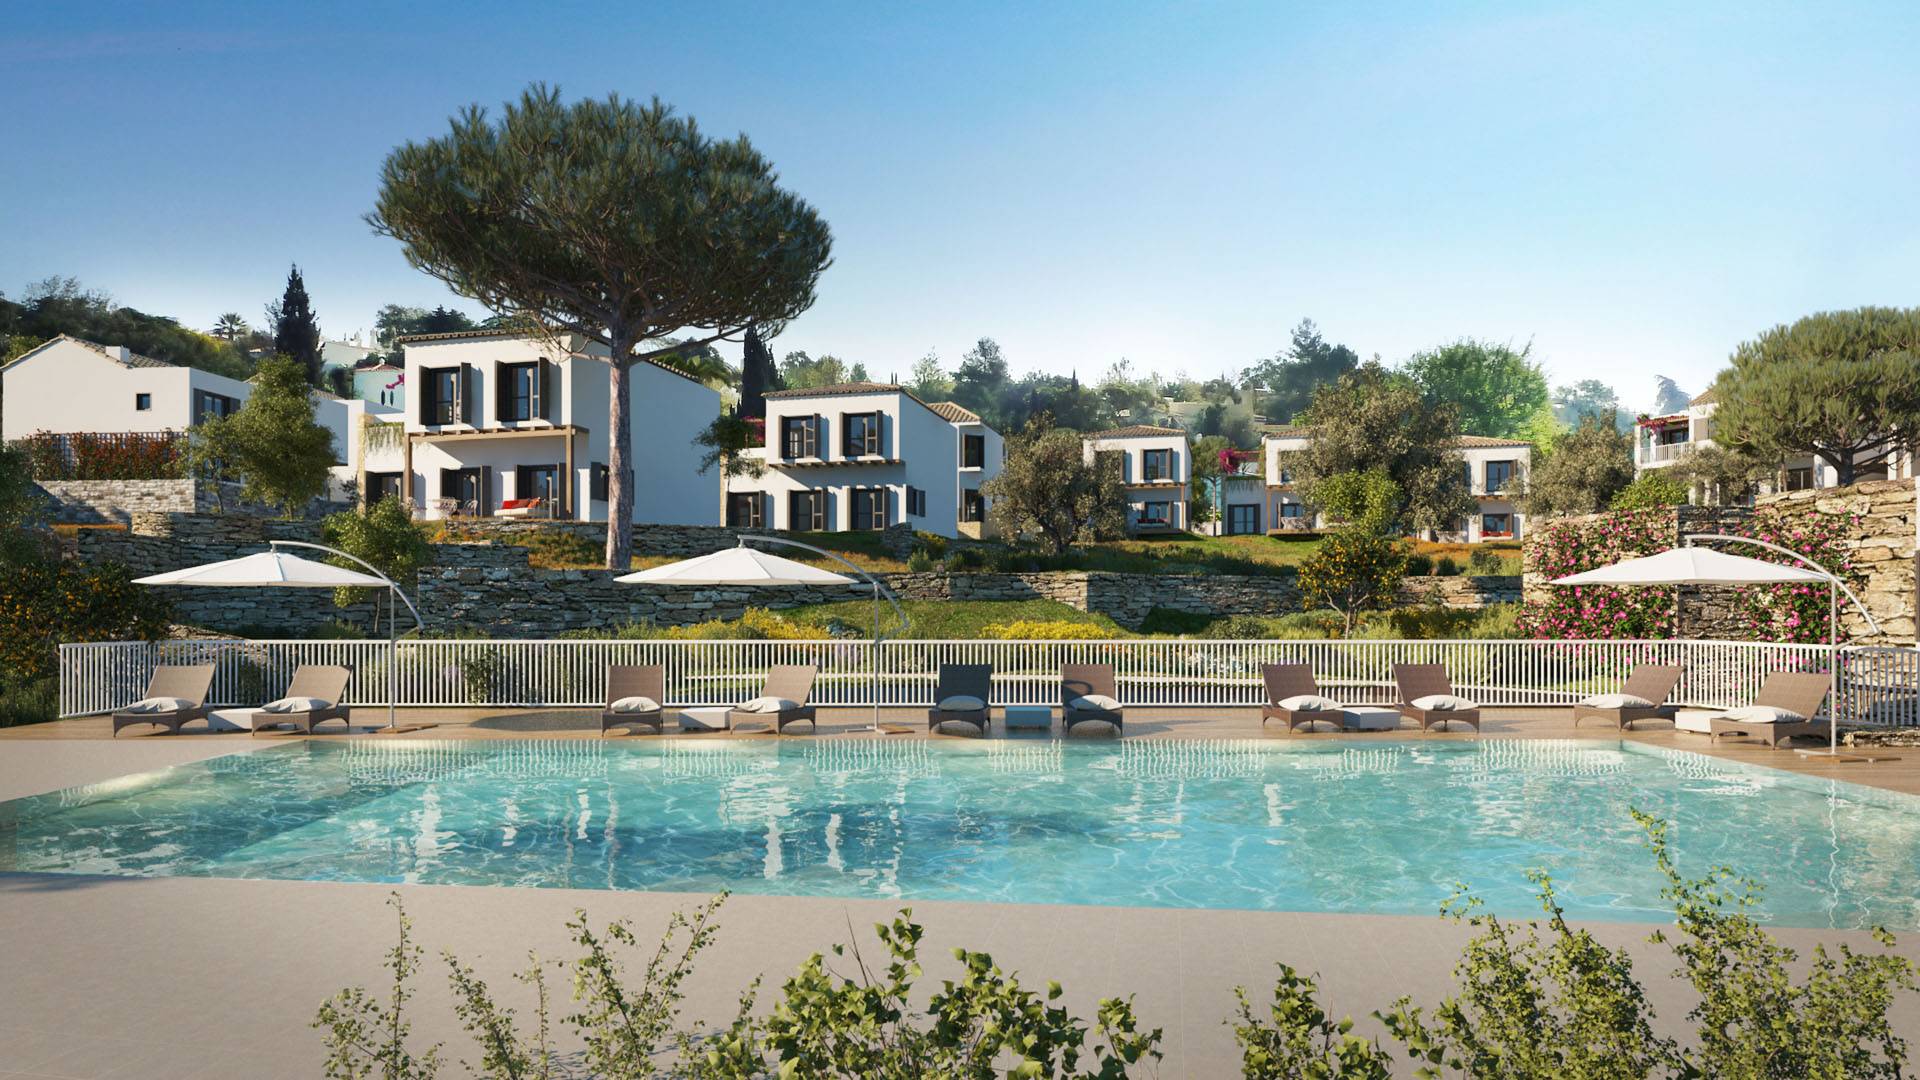 Green homes built for year-round living at Carvoeiro town - The Algarve